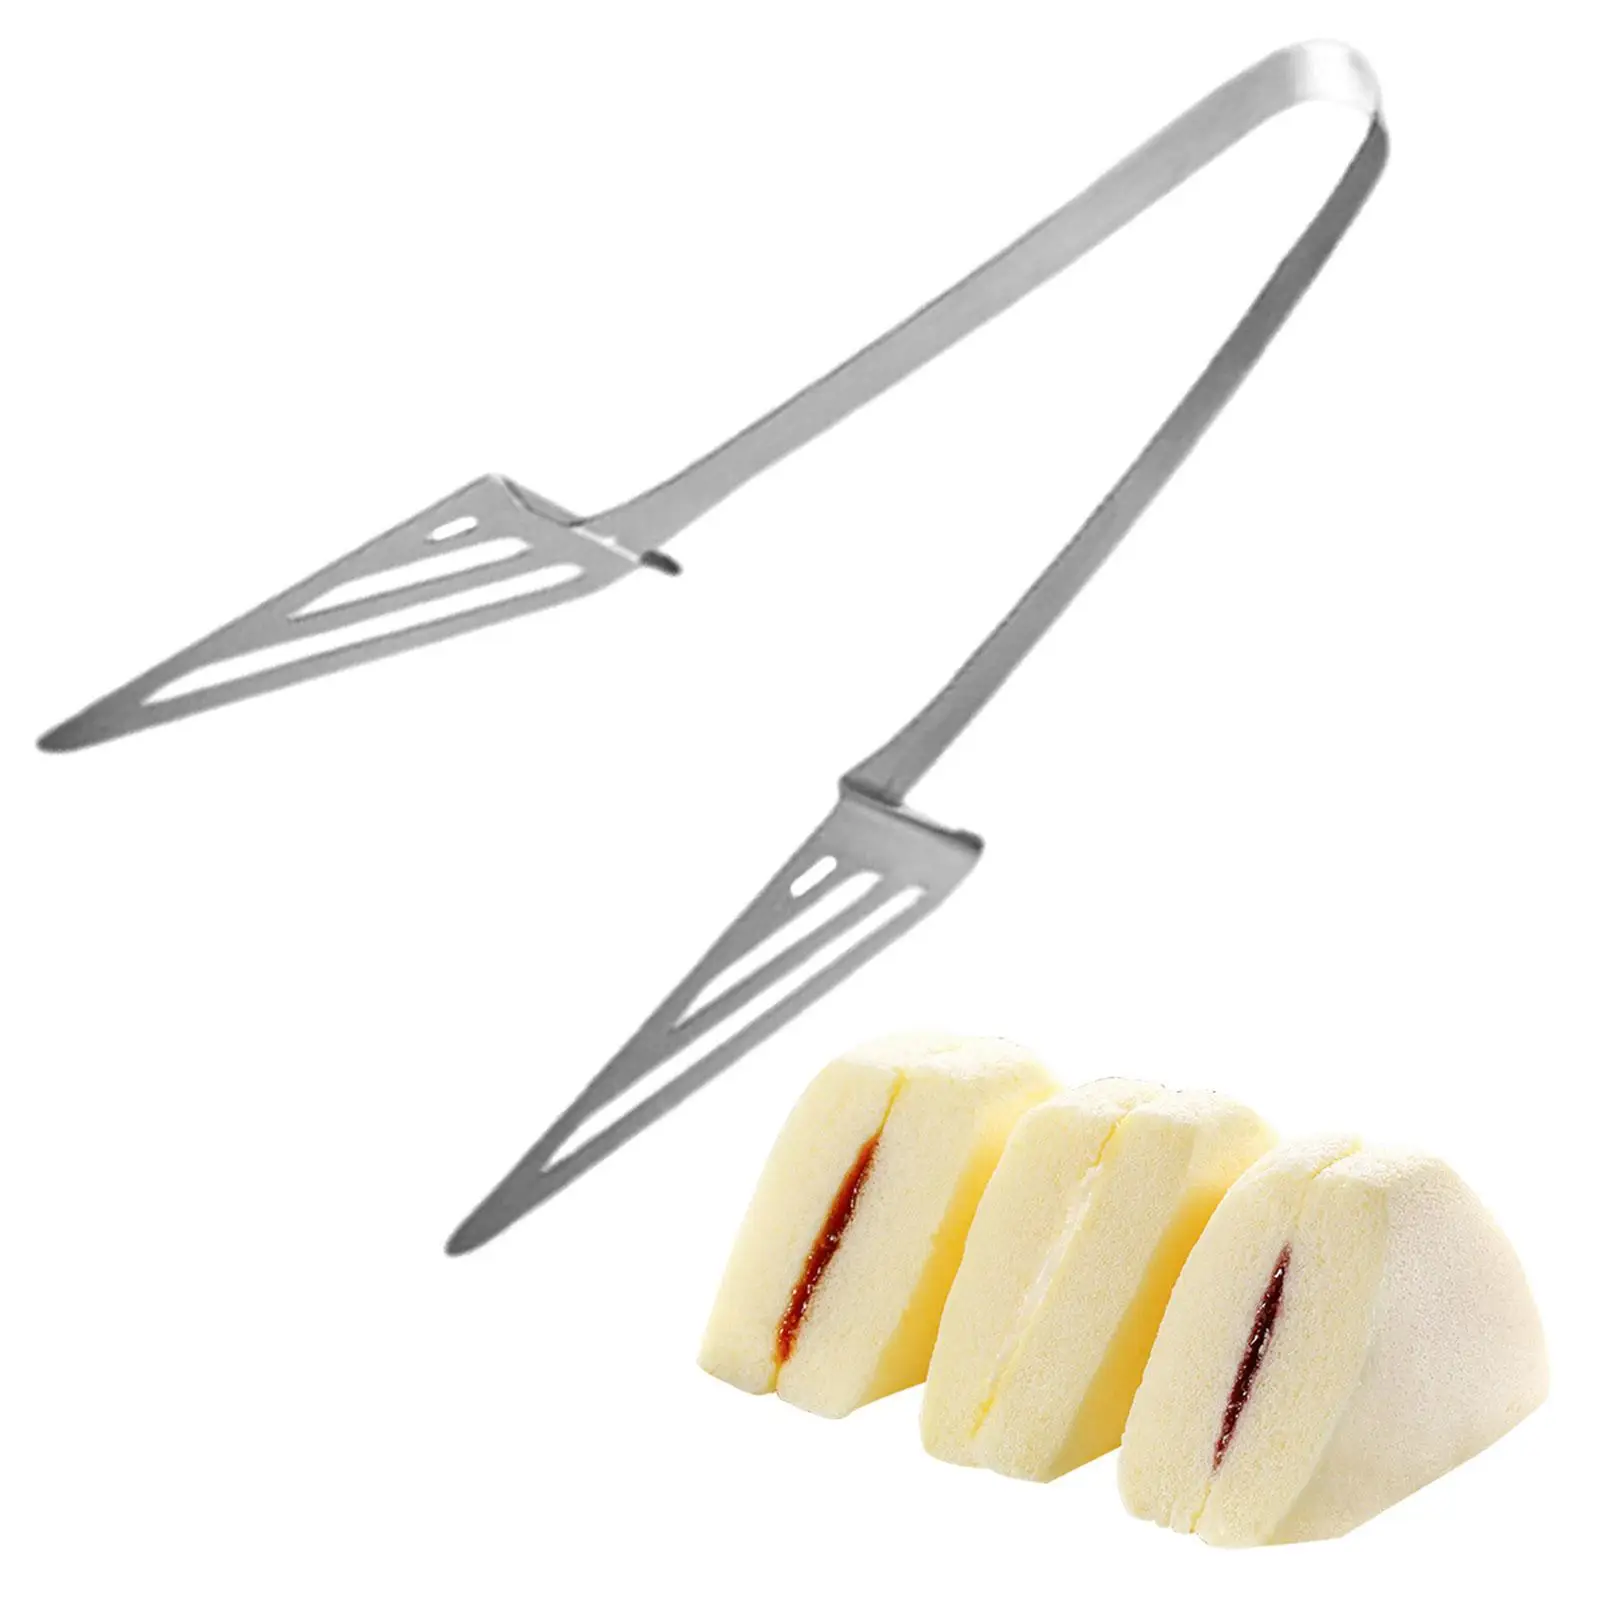 Serving Tongs Pastry Tongs Food Clip Cookie Maker Pastry Clamp Multipurpose Kitchen Tongs Food Tongs for Bar Barbecue Kitchen